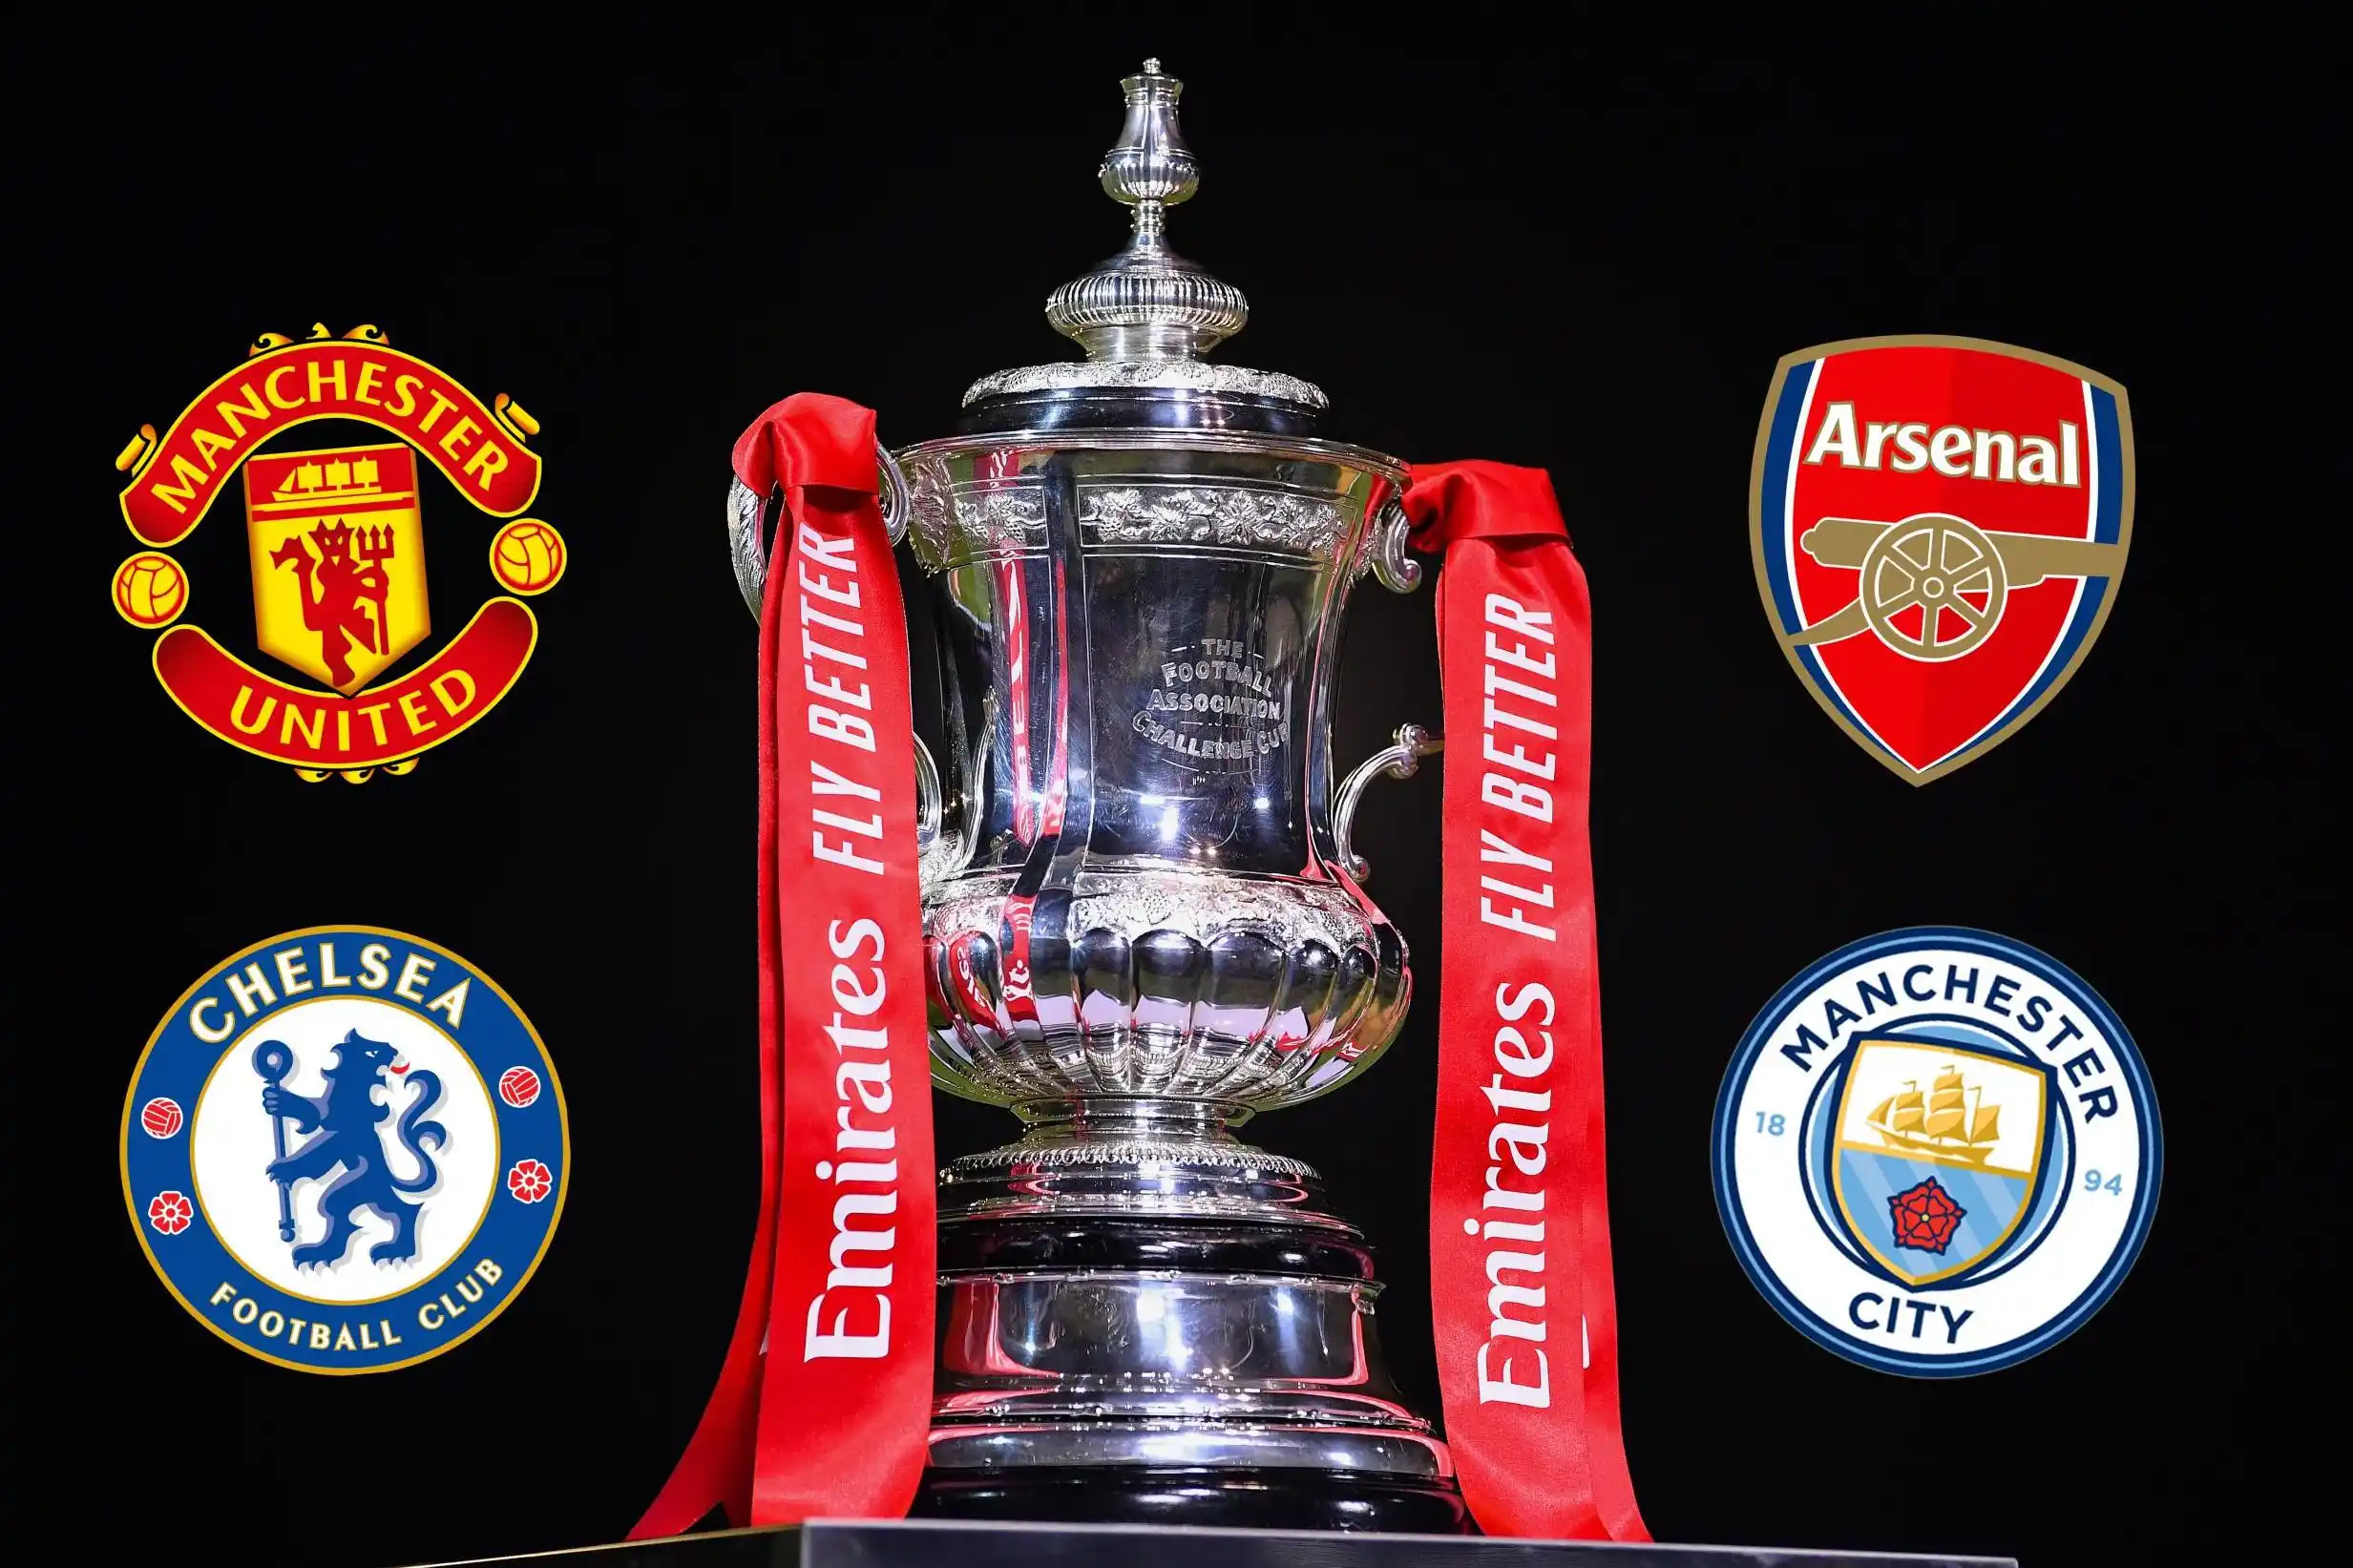 FA Cup Semi-Final Fixtures: Manchester United vs Chelsea and Arsenal vs Manchester City